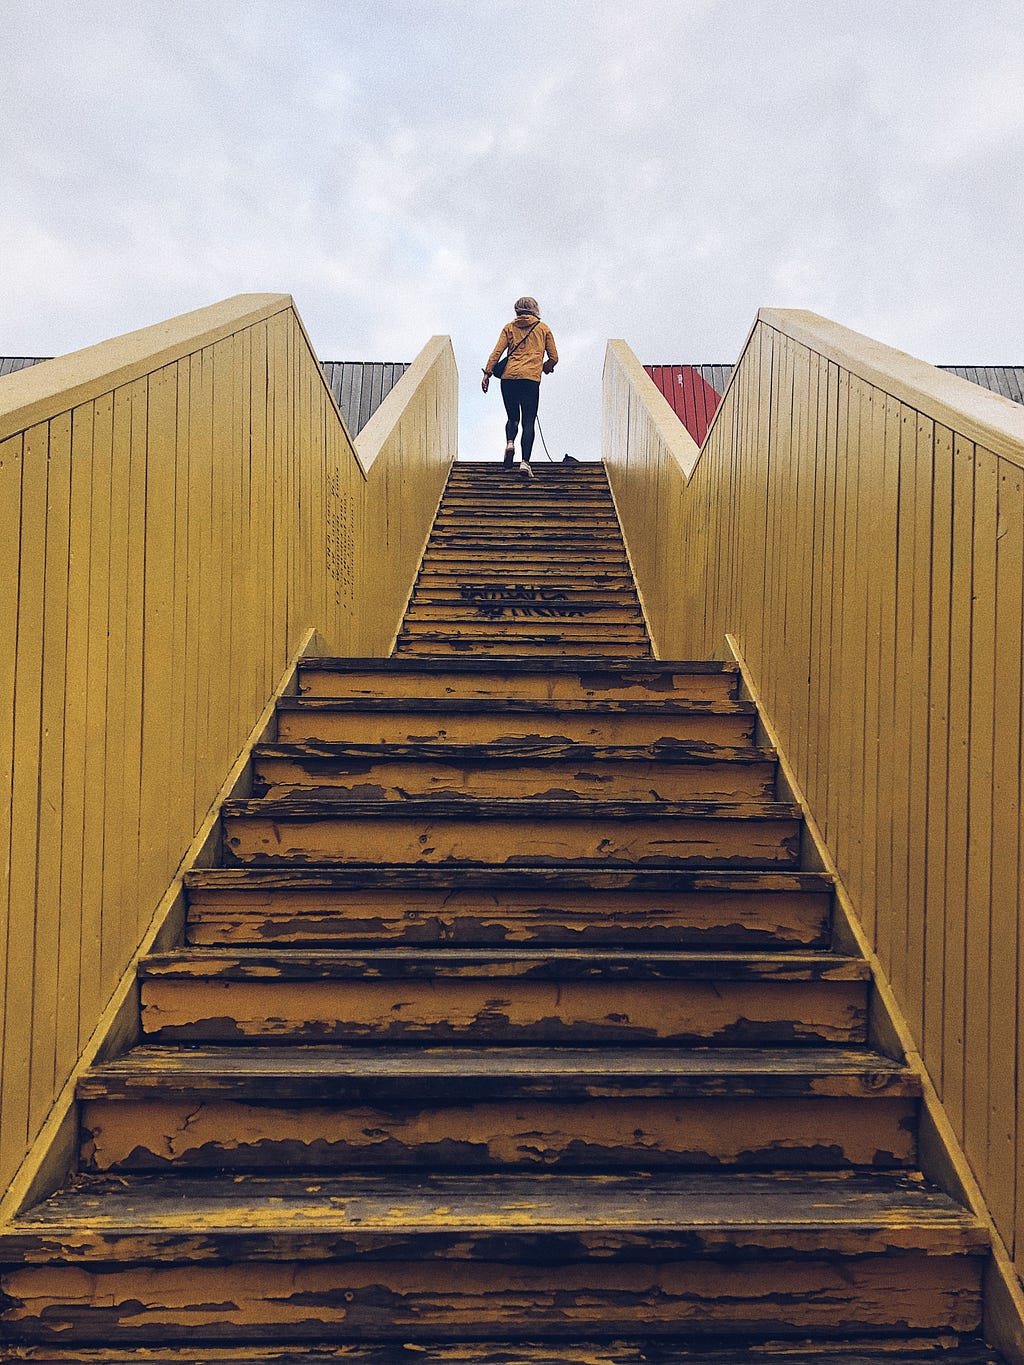 A woman dressed in yellow climbing the stairs. The stairway is also painted yellow